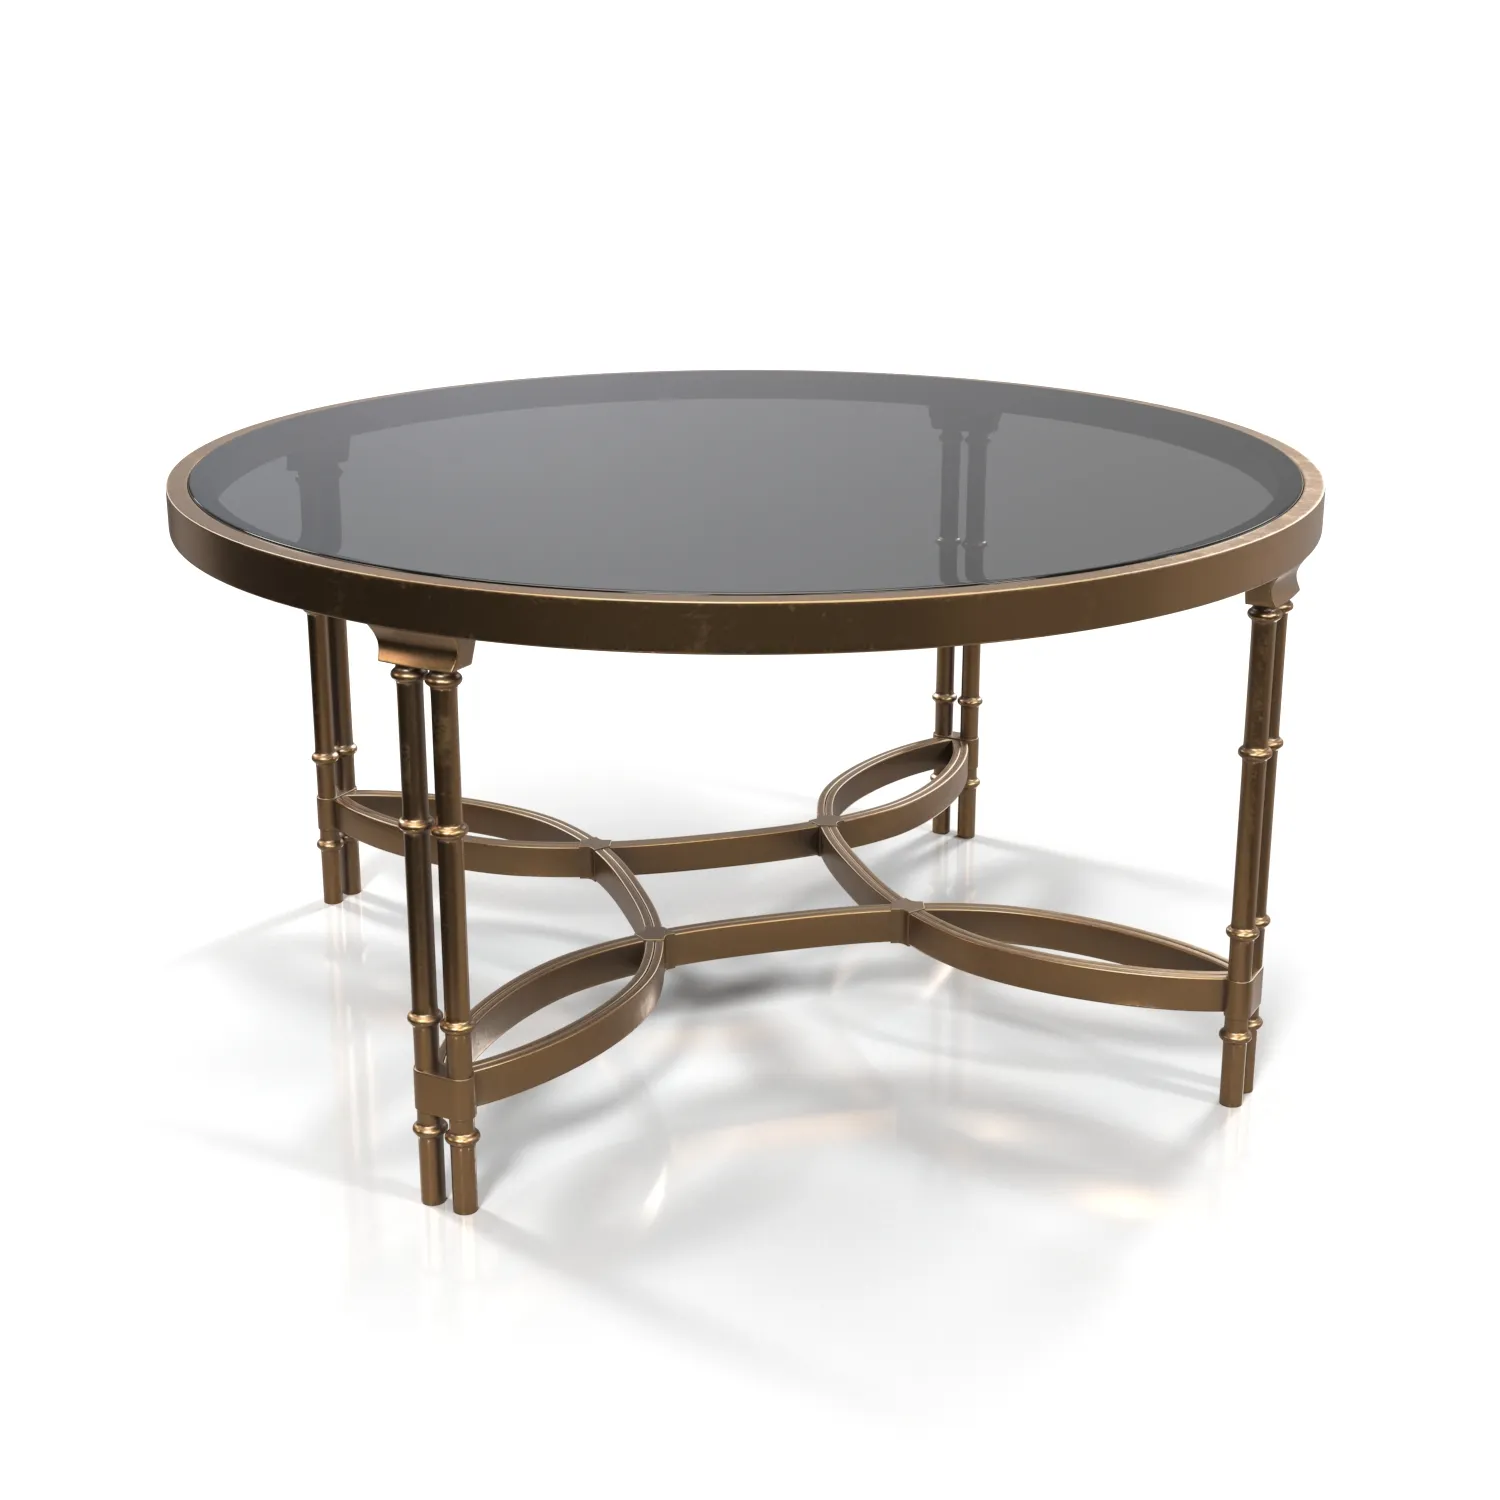 Handmade Decorative Rounded Coffee Table Gold Finish And Top Glass PBR 3D Model_01